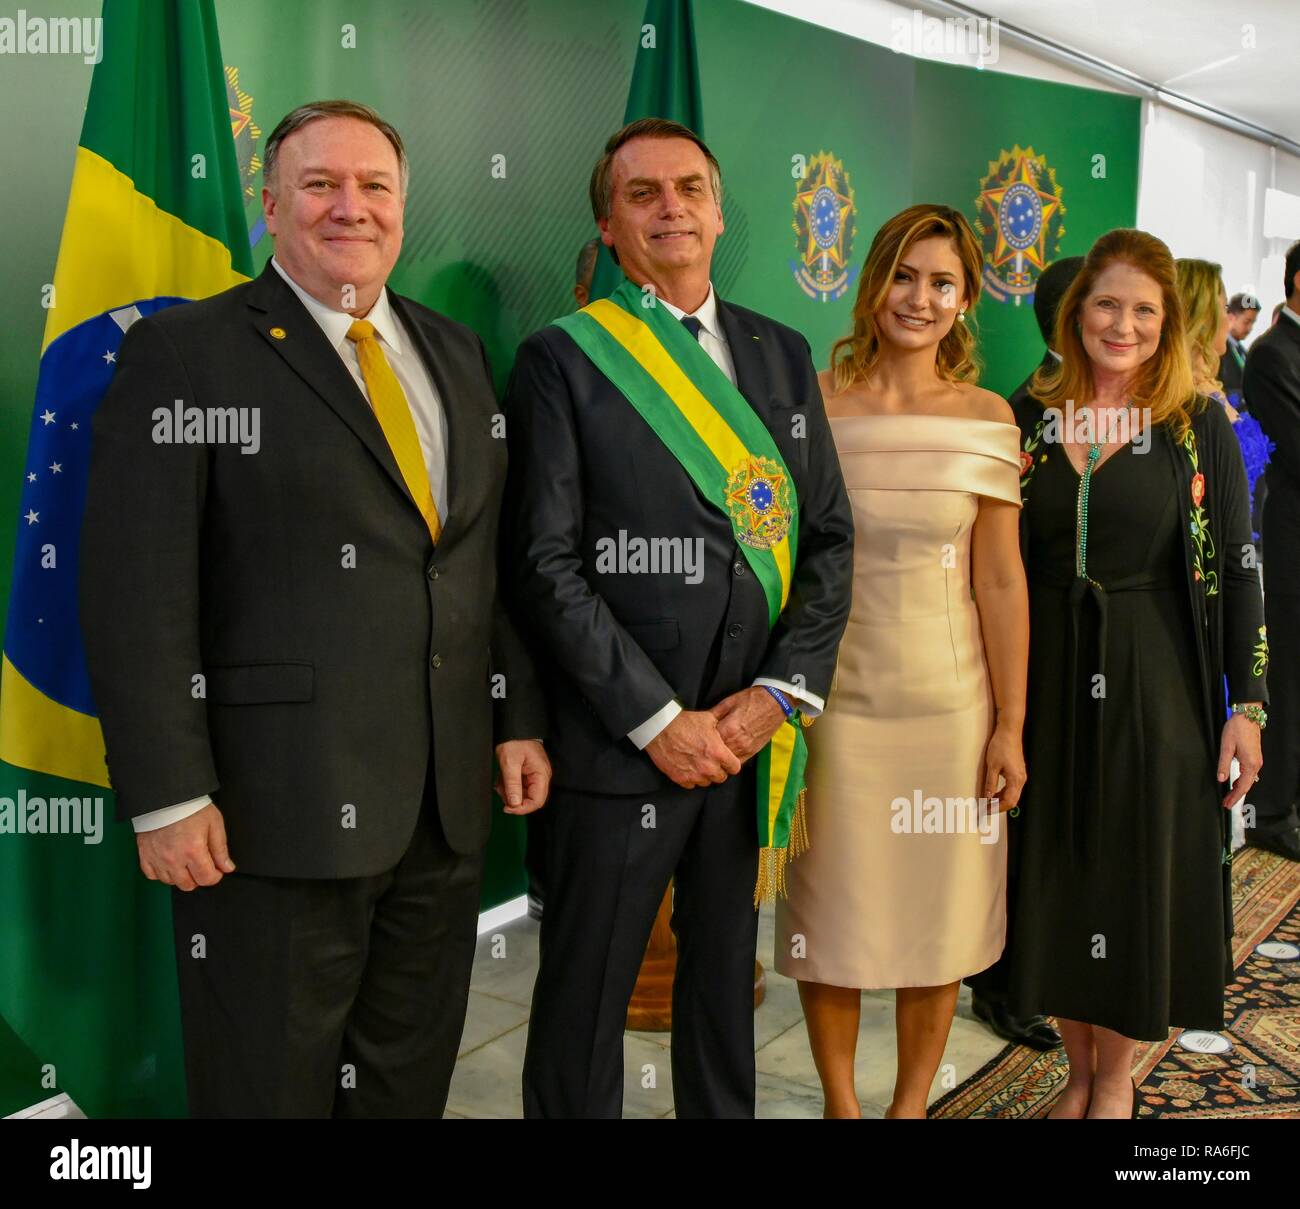 U.S. Secretary of State Mike Pompeo, left, and his wife Susan Pompeo, right, stands with Brazilian President Jair Bolsonaro and Brazilian First Lady Michelle de Paula Firmo Reinaldo Bolsonaro during the inaugural January 1, 2019 in Brasilia, Brazil. Stock Photo